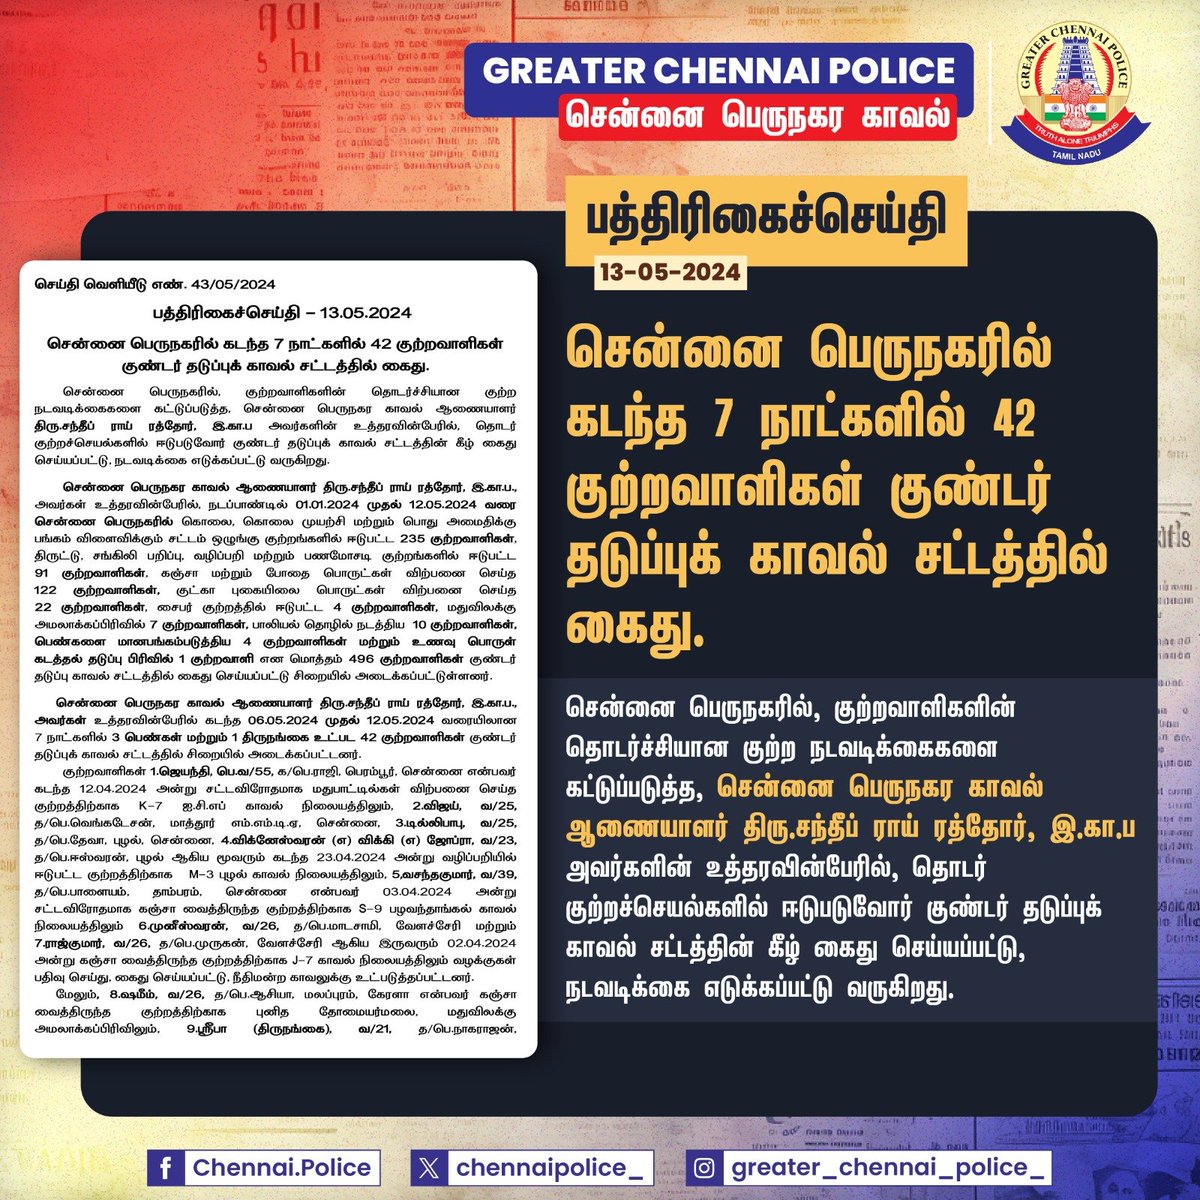 42 accused detained under Goondas Act in last 7 days in #GreaterChennaiPolice for an effective control over the offenders. #Chennai #Police #InPublicService @SandeepRRathore